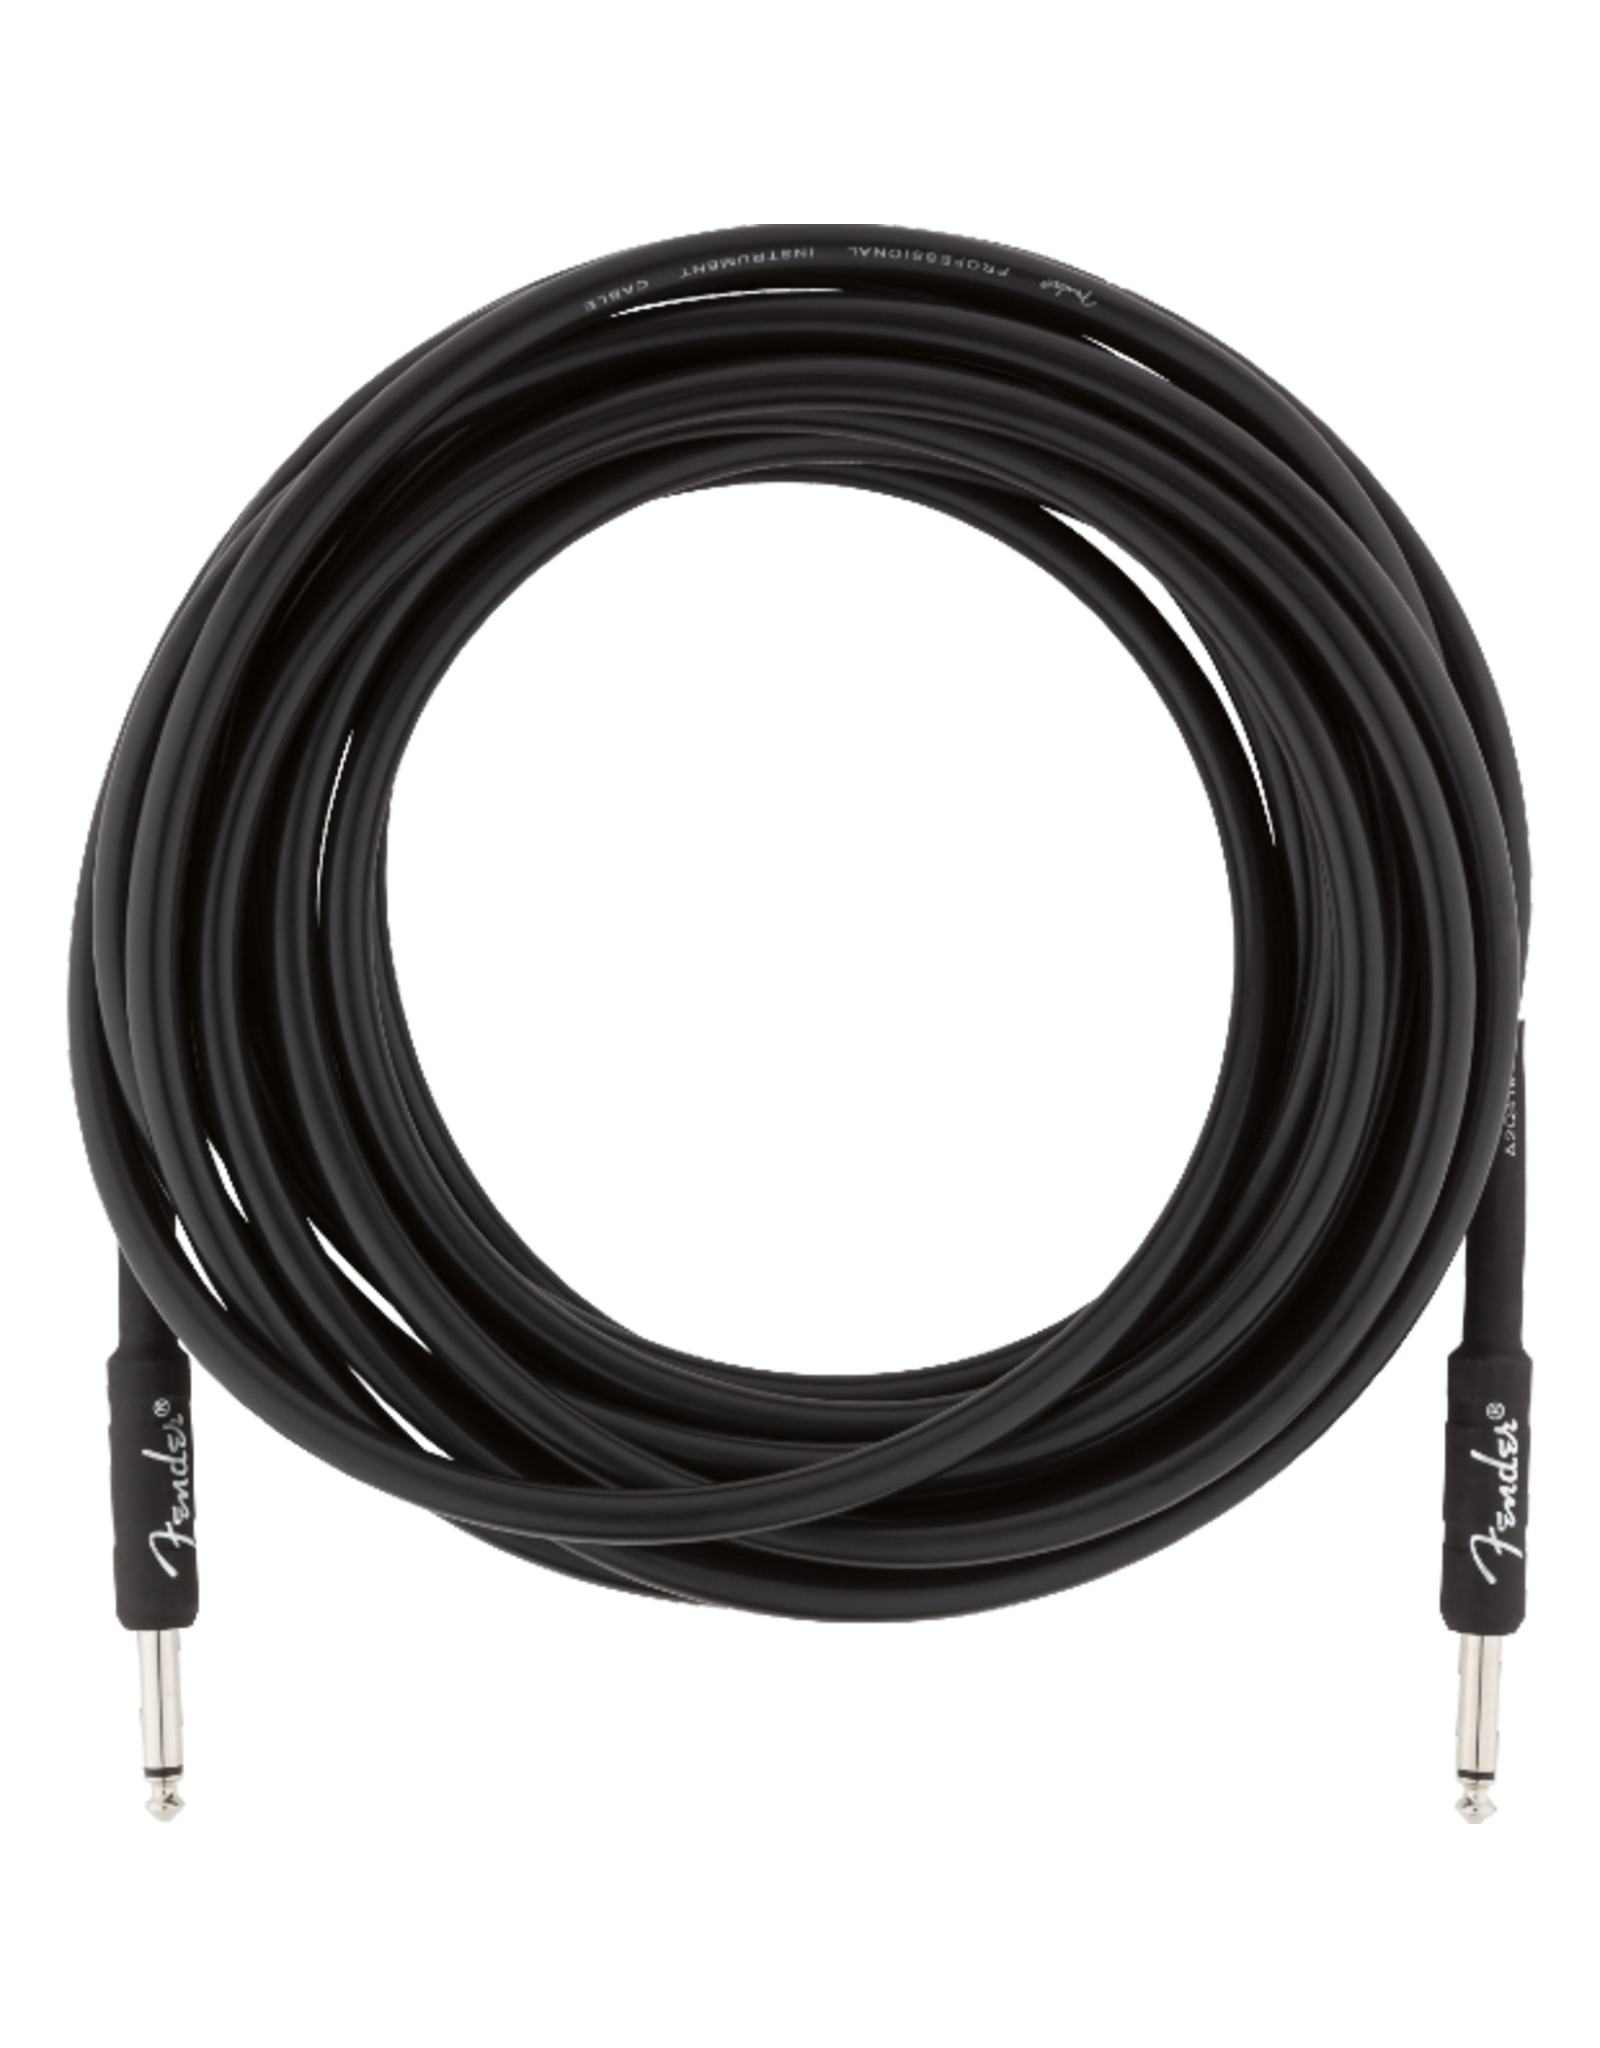 Fender Fender Professional Series Instrument Cable, Straight/Straight, 25', Black